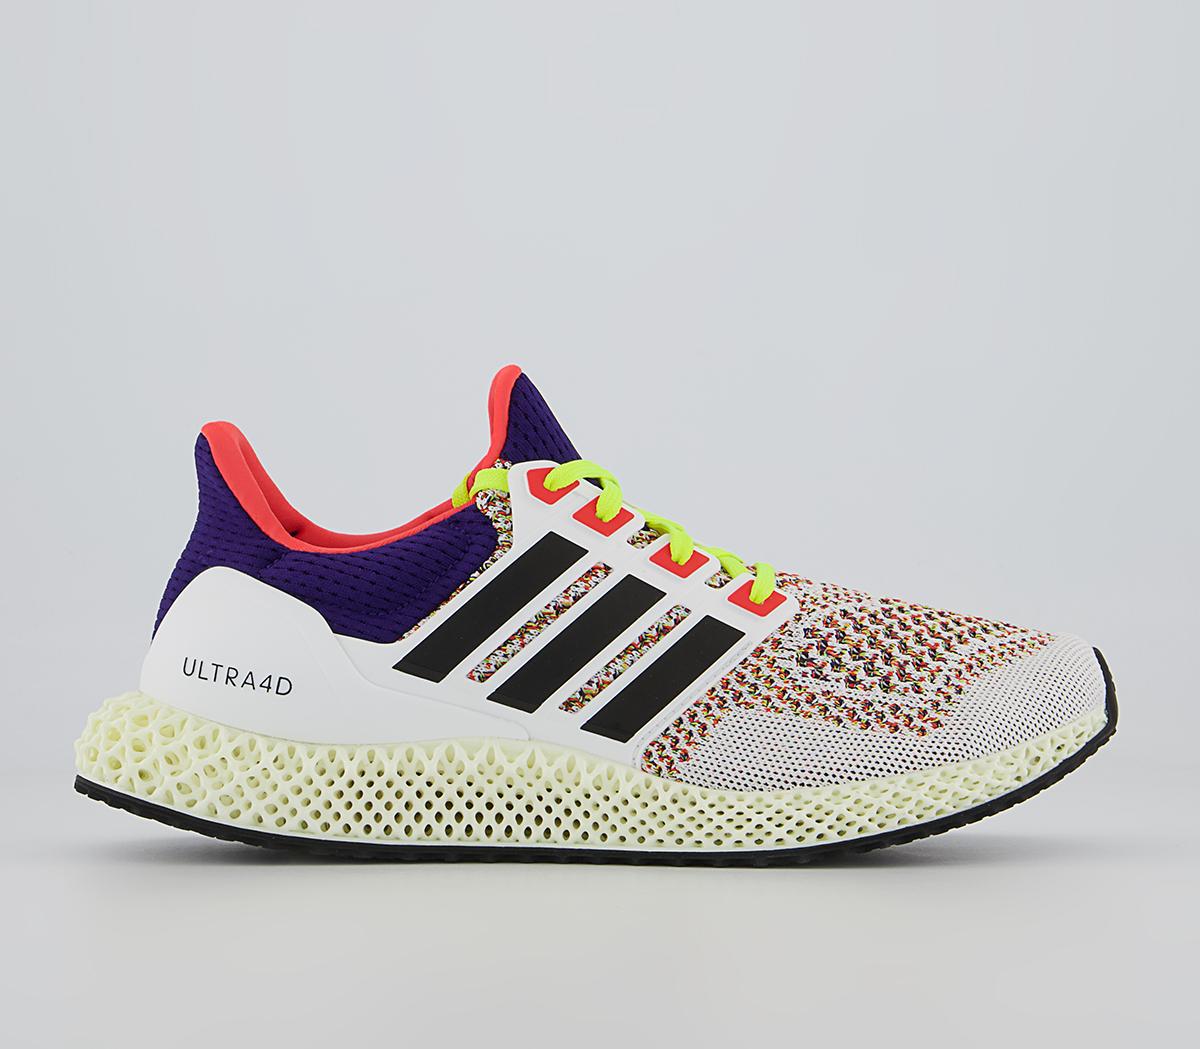 adidas UltraboostUltra 4D TrainersWhite Core Black Solar Red